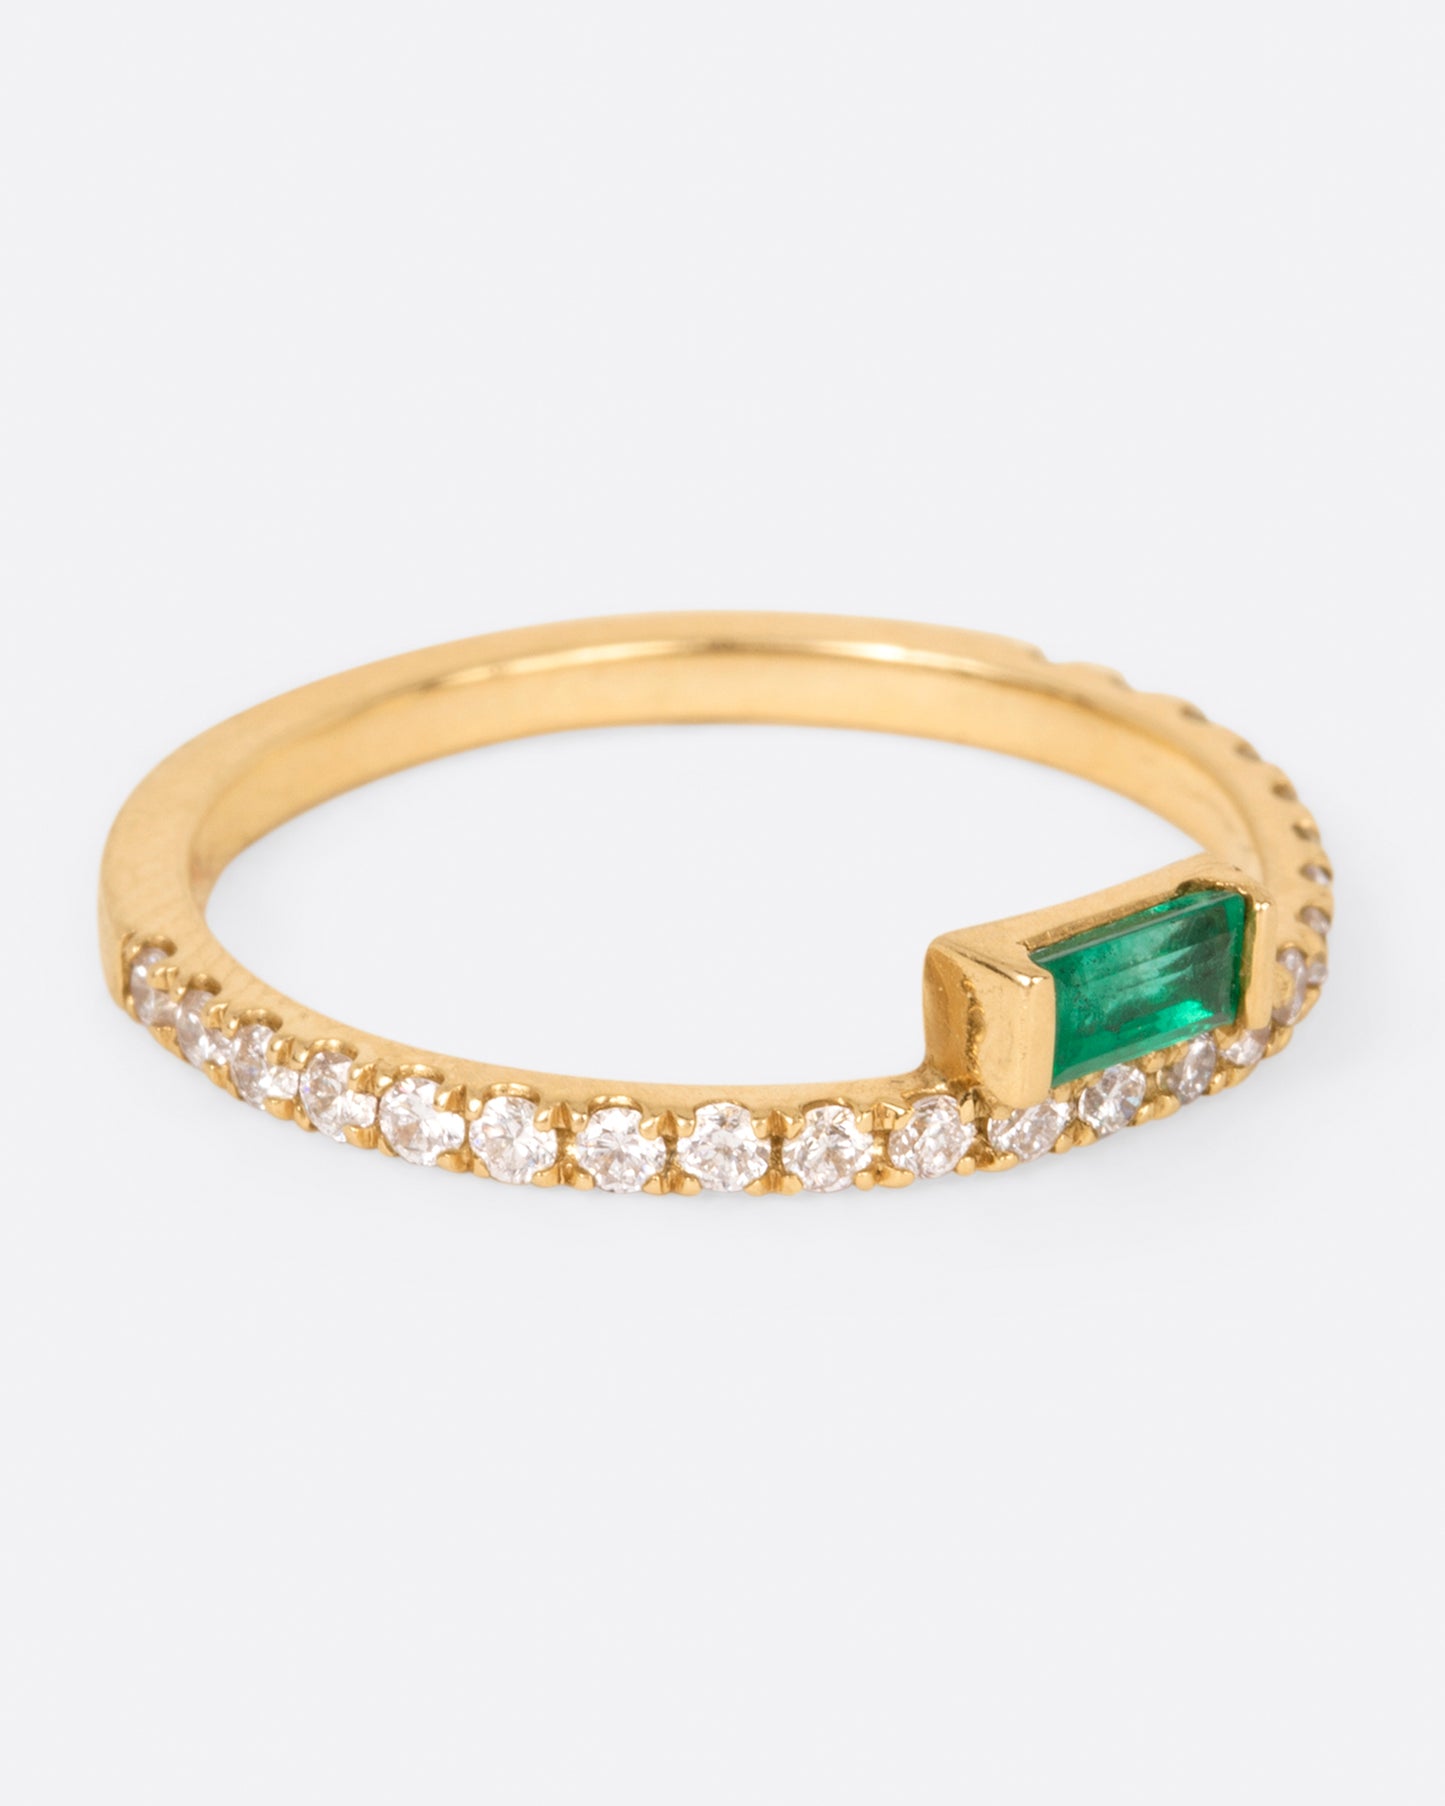 A yellow gold ring with white diamonds going 2/3 of the way around and an emerald baguette sitting atop it, shown from the side.